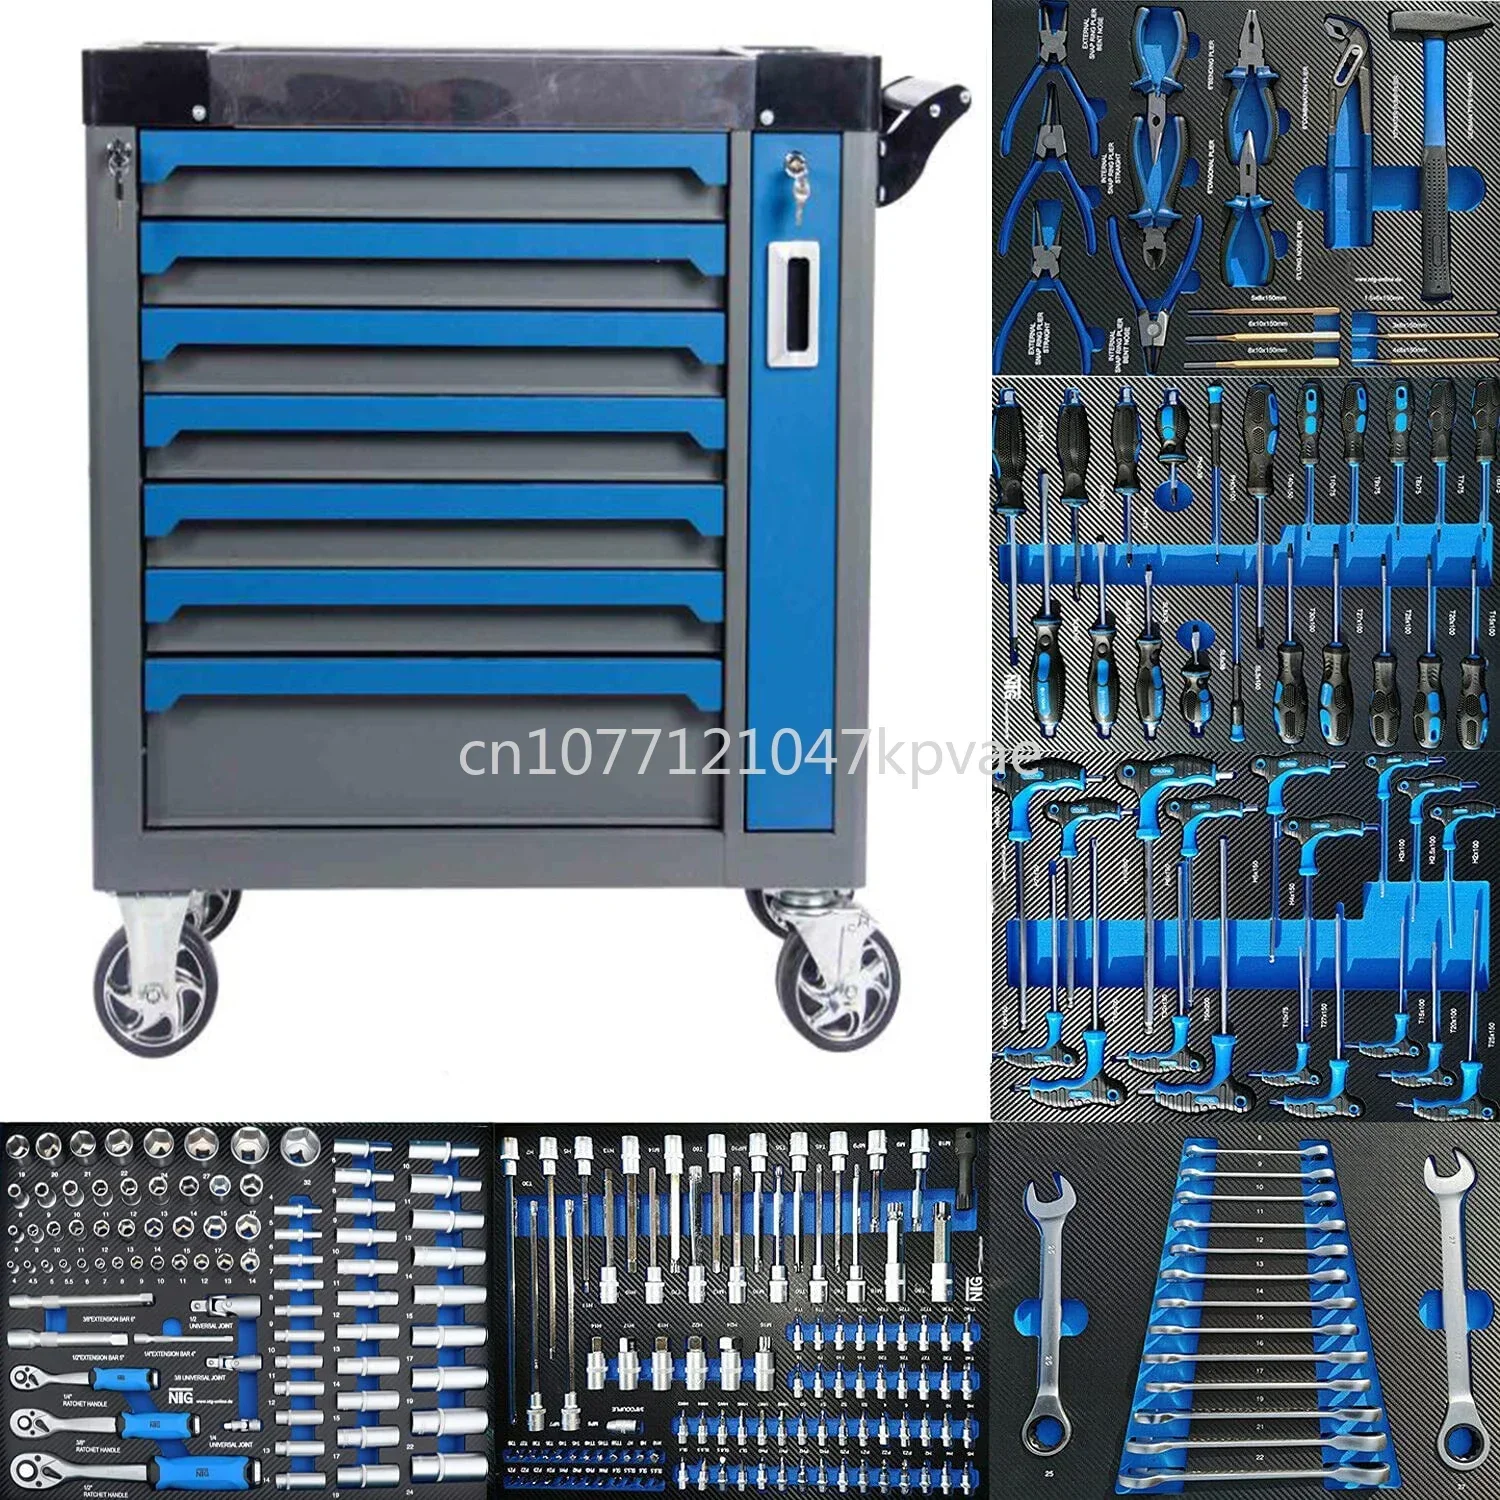 

Tools Box Cabinet With 300 Pcs Tools Set Cheaper Price - Professional 7 Drawers